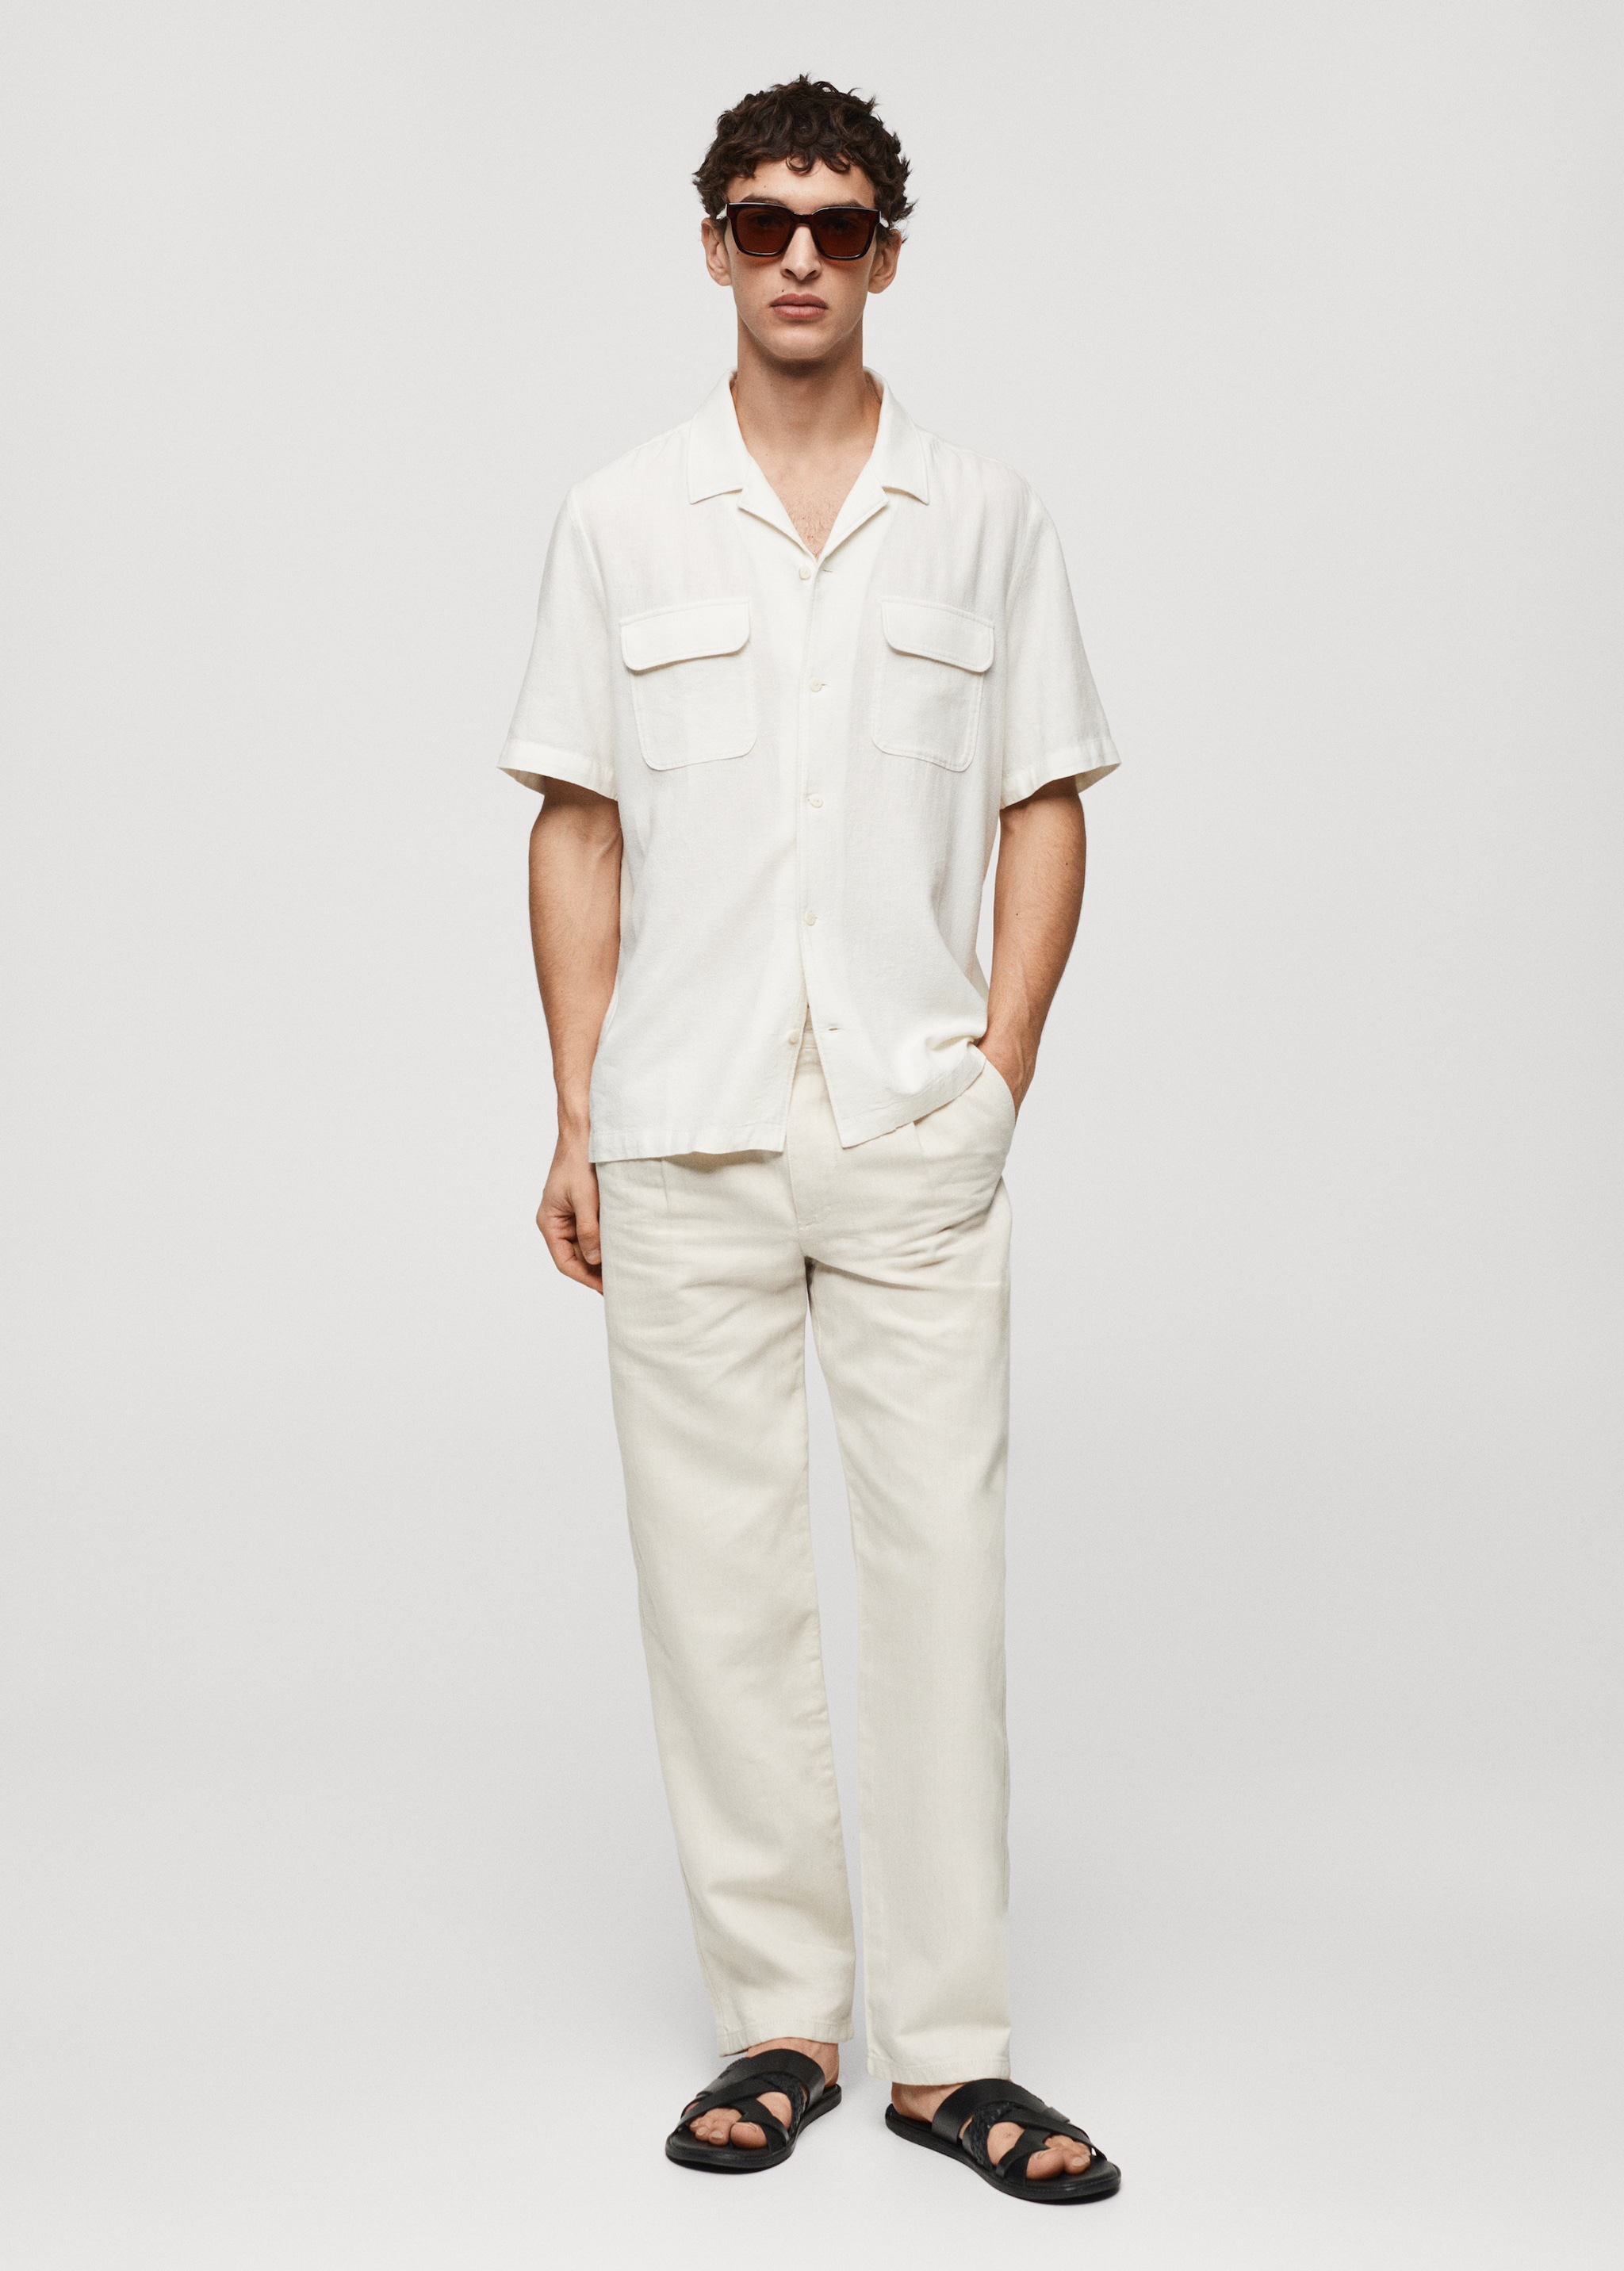 Linen shirt with bowling collar and pockets - General plane